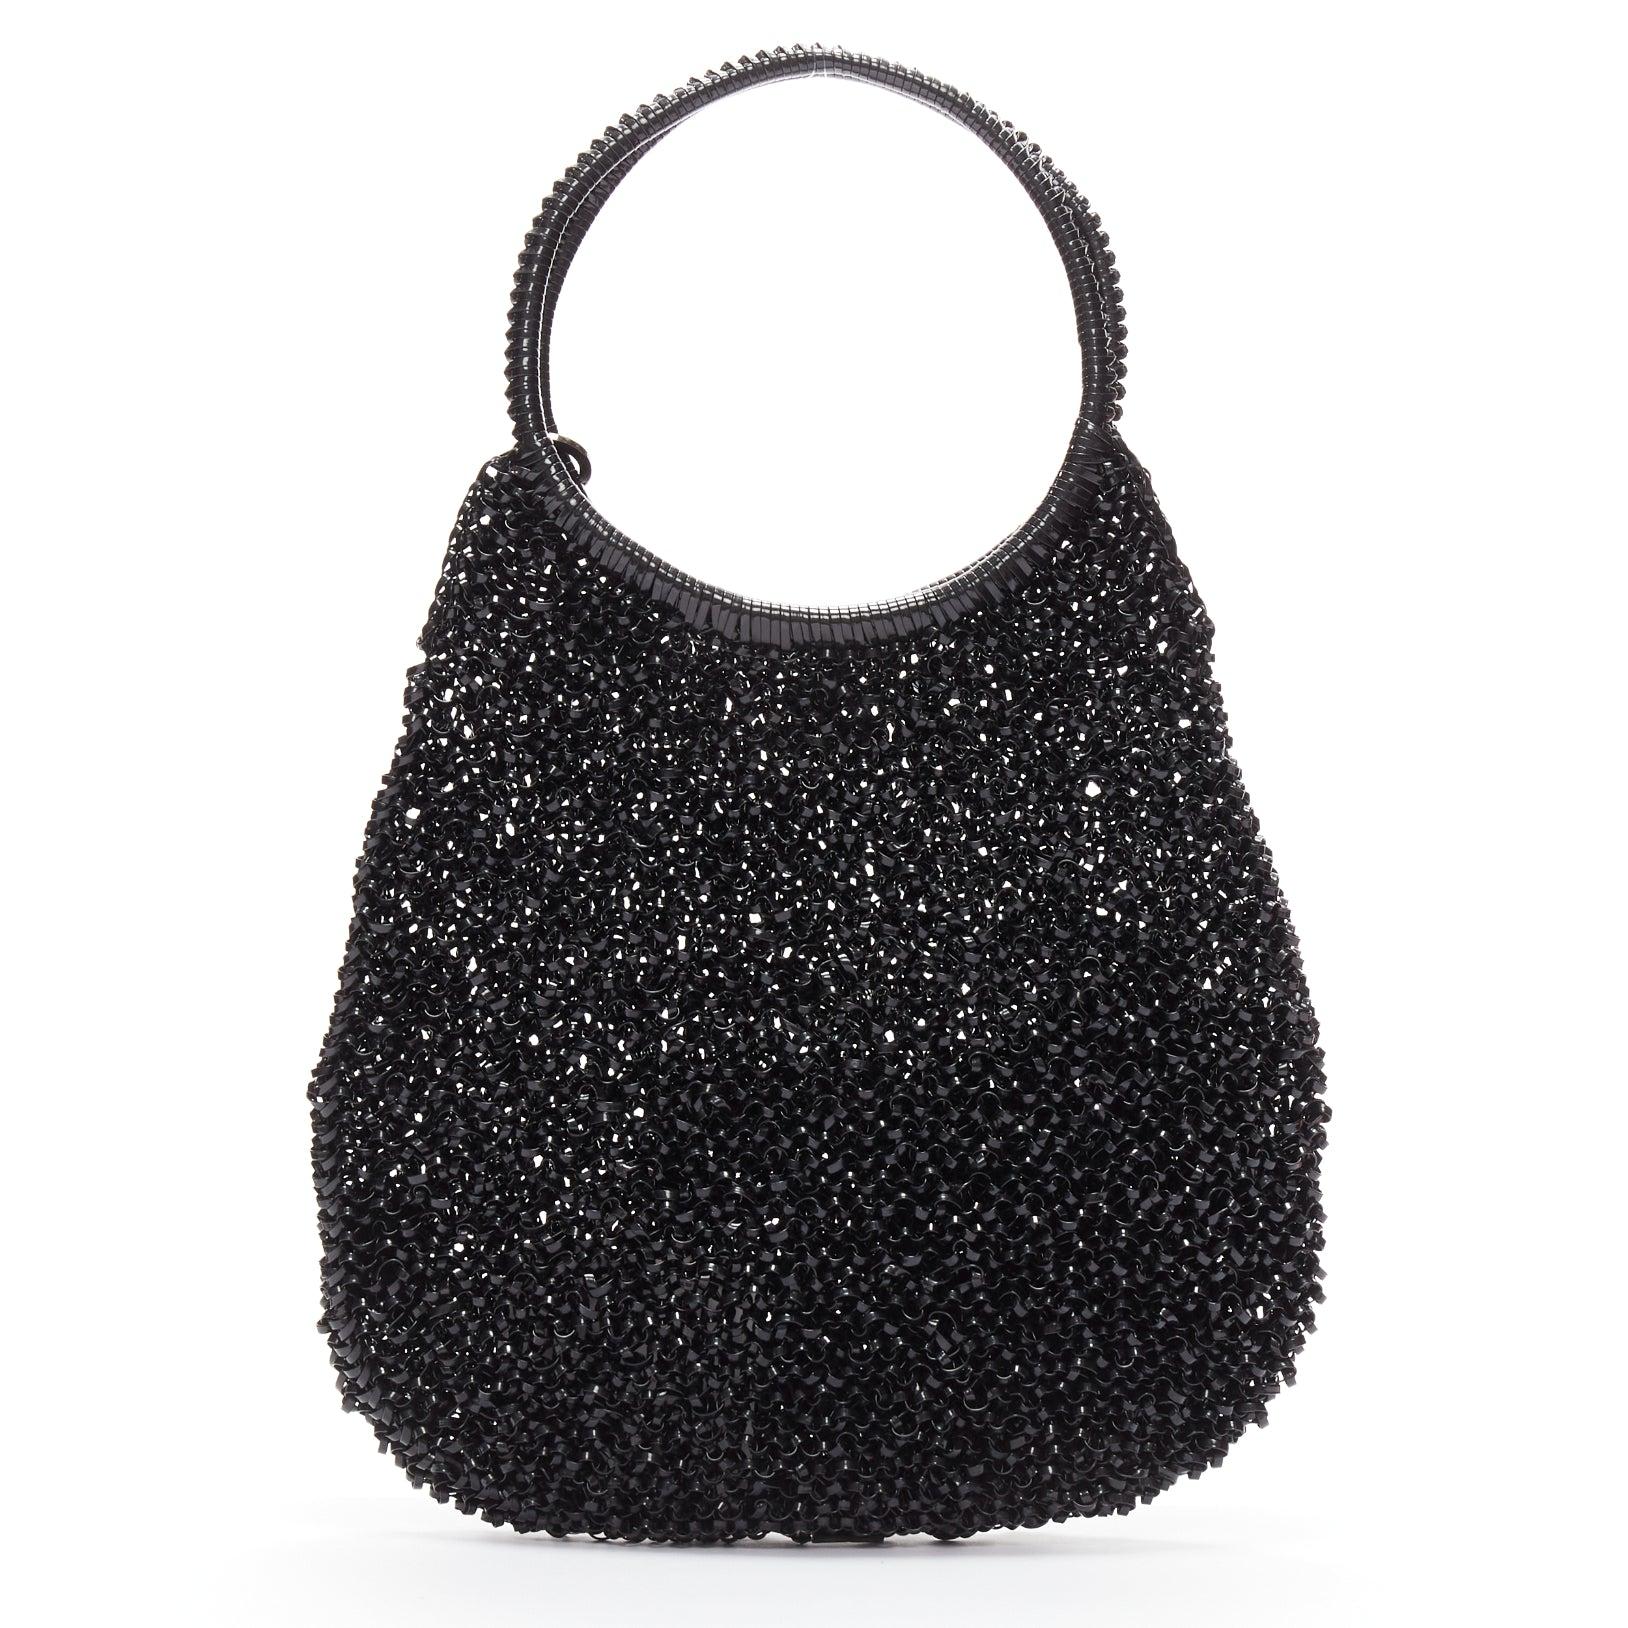 ANTEPRIMA HELLO KITTY Wire Bag black crystal leather sequin teardrop tote For Sale 1